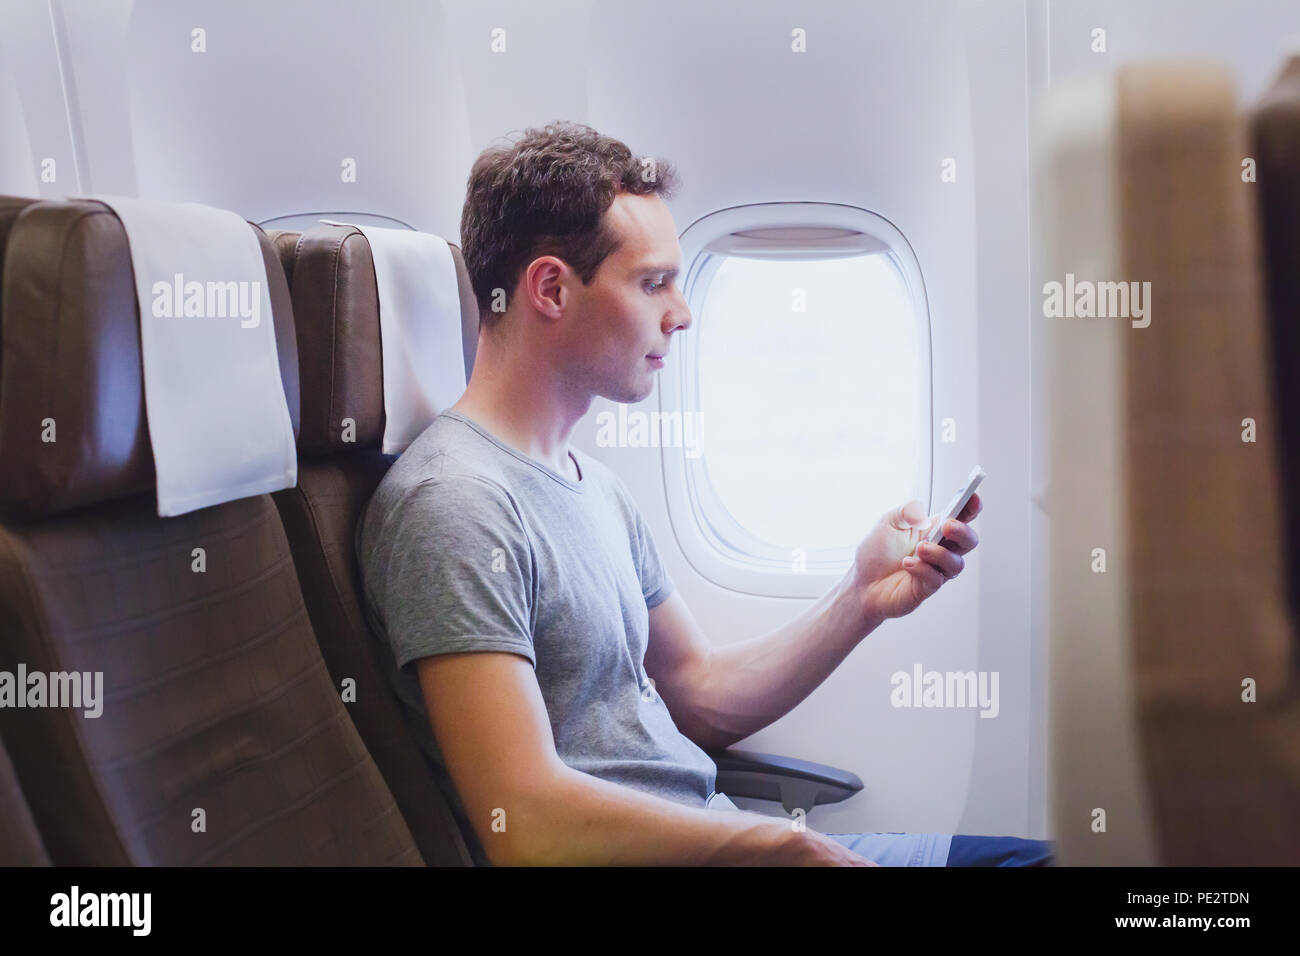 passenger of airplane using mobile smart phone in the plane, travel app on smartphone Stock Photo